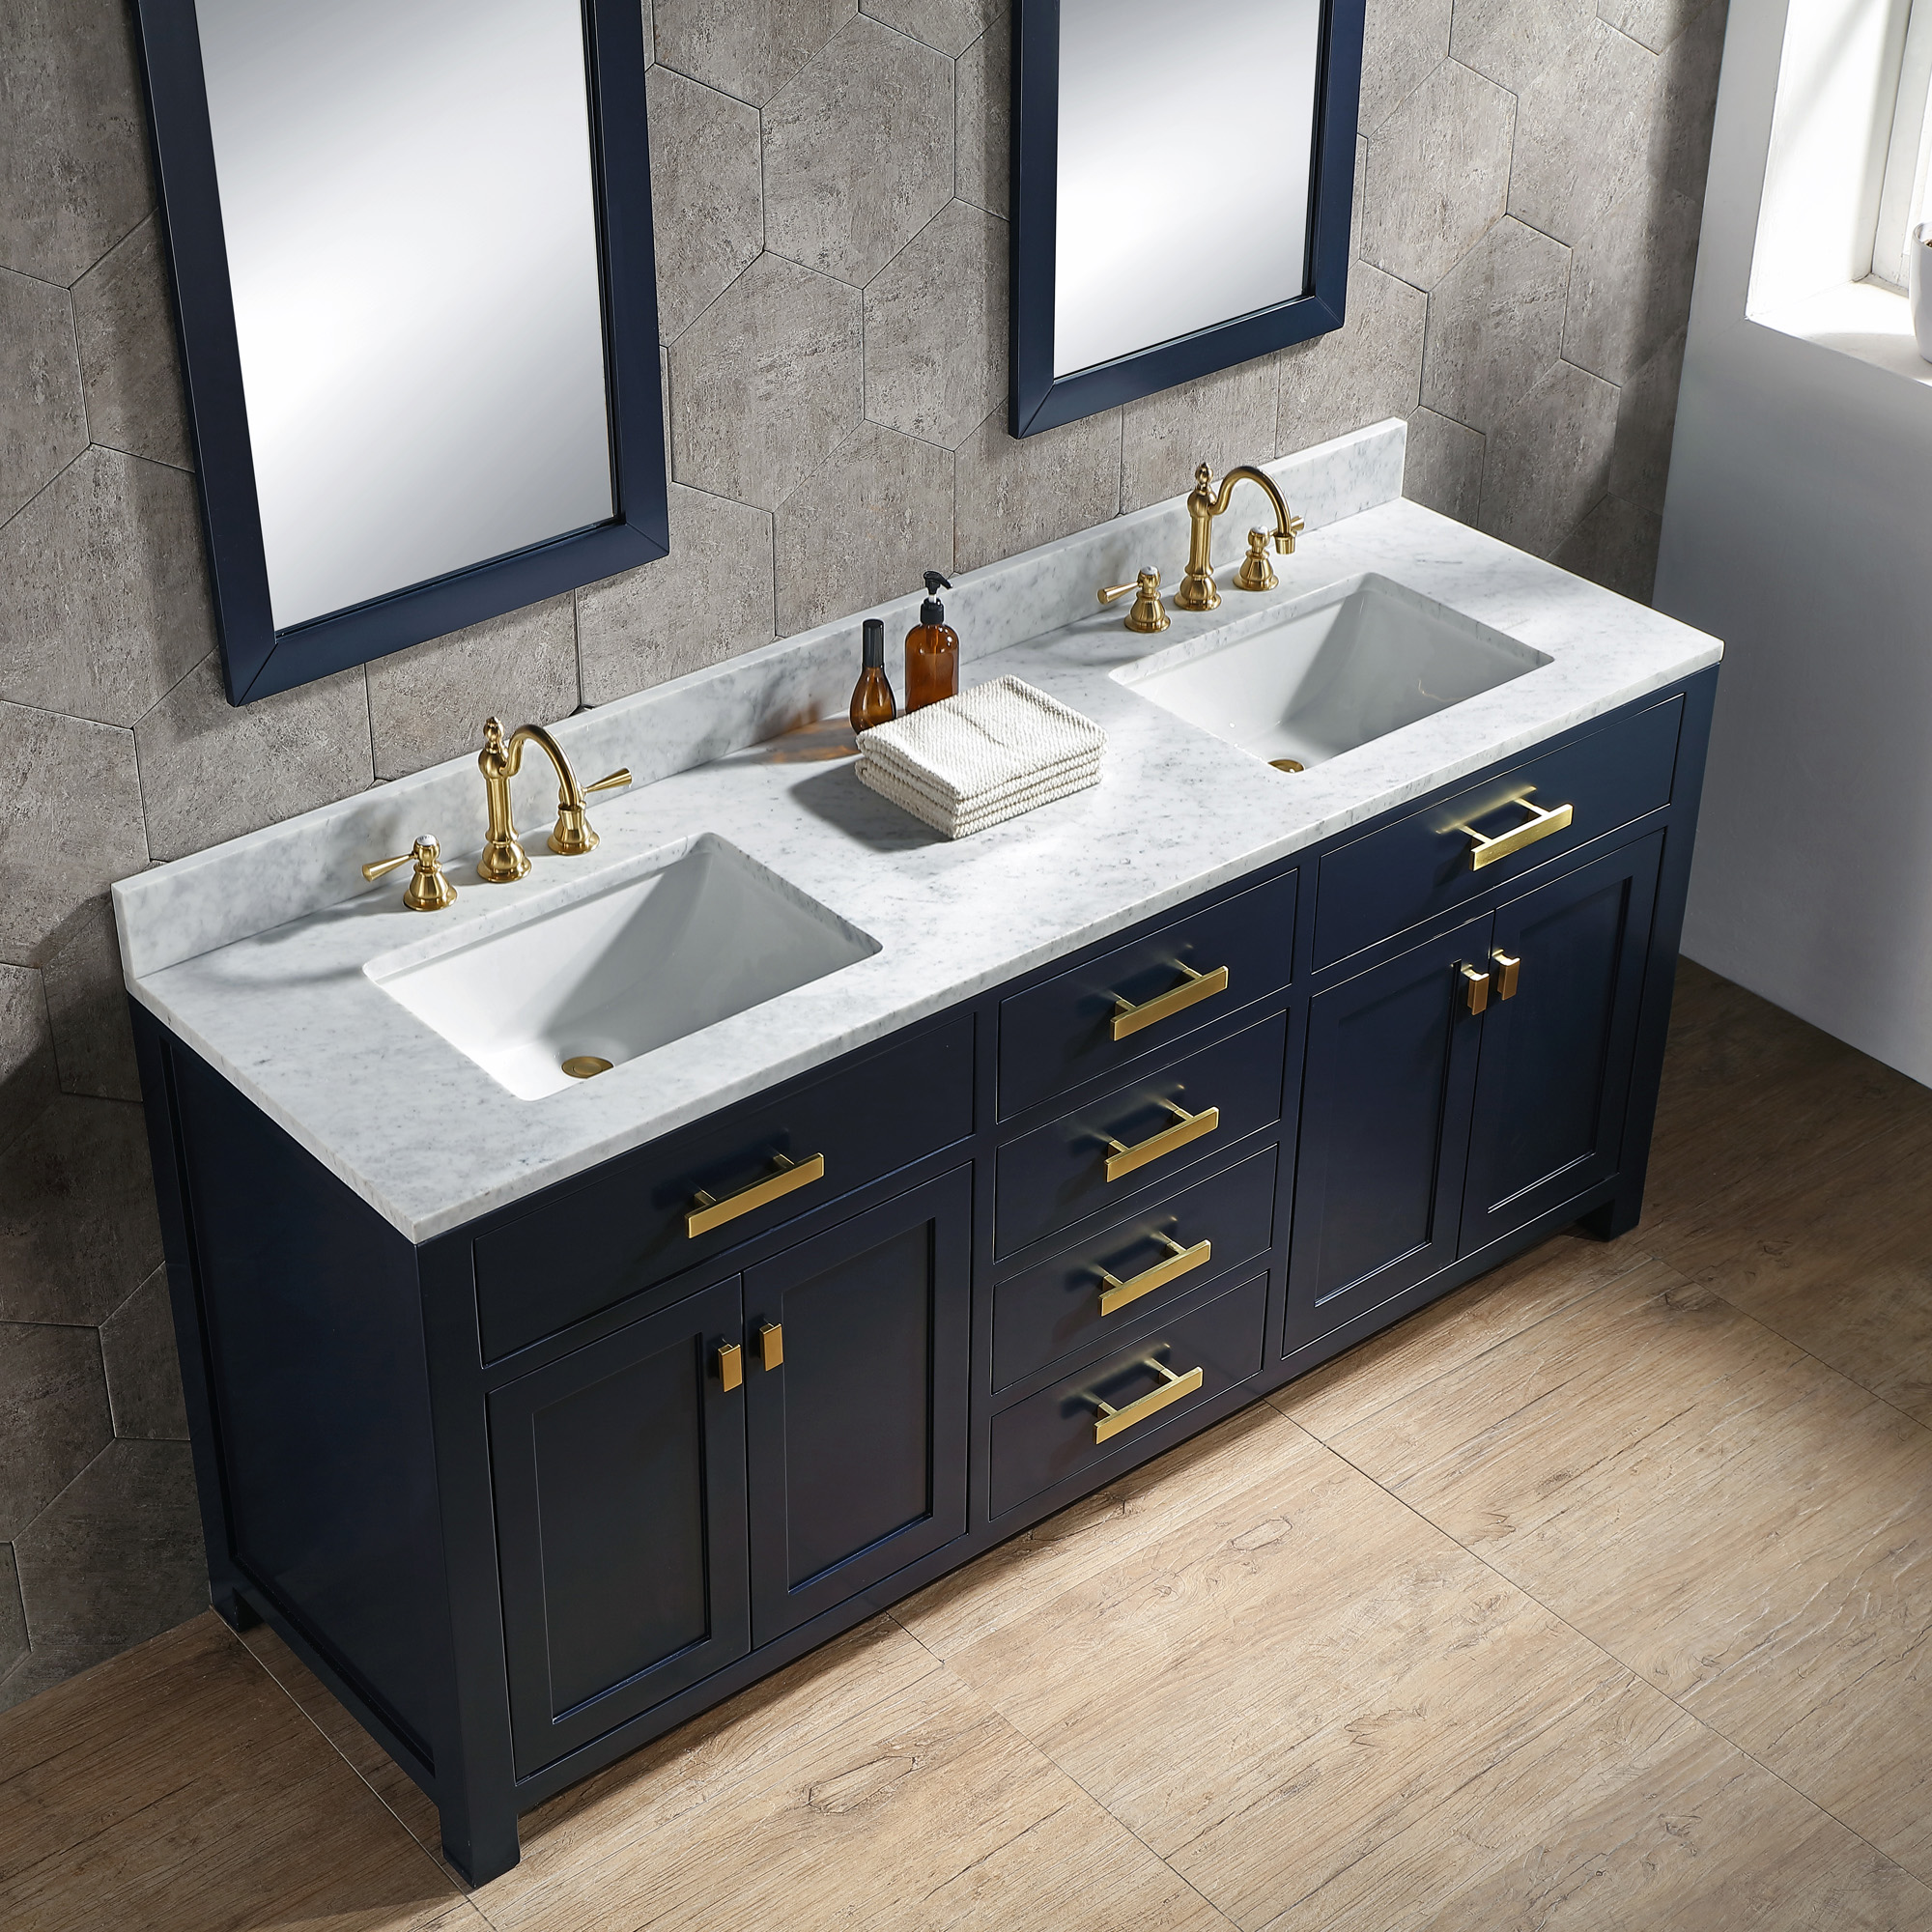 72" Double Sink Carrara White Marble Vanity In Monarch Blue Color - 2 1439